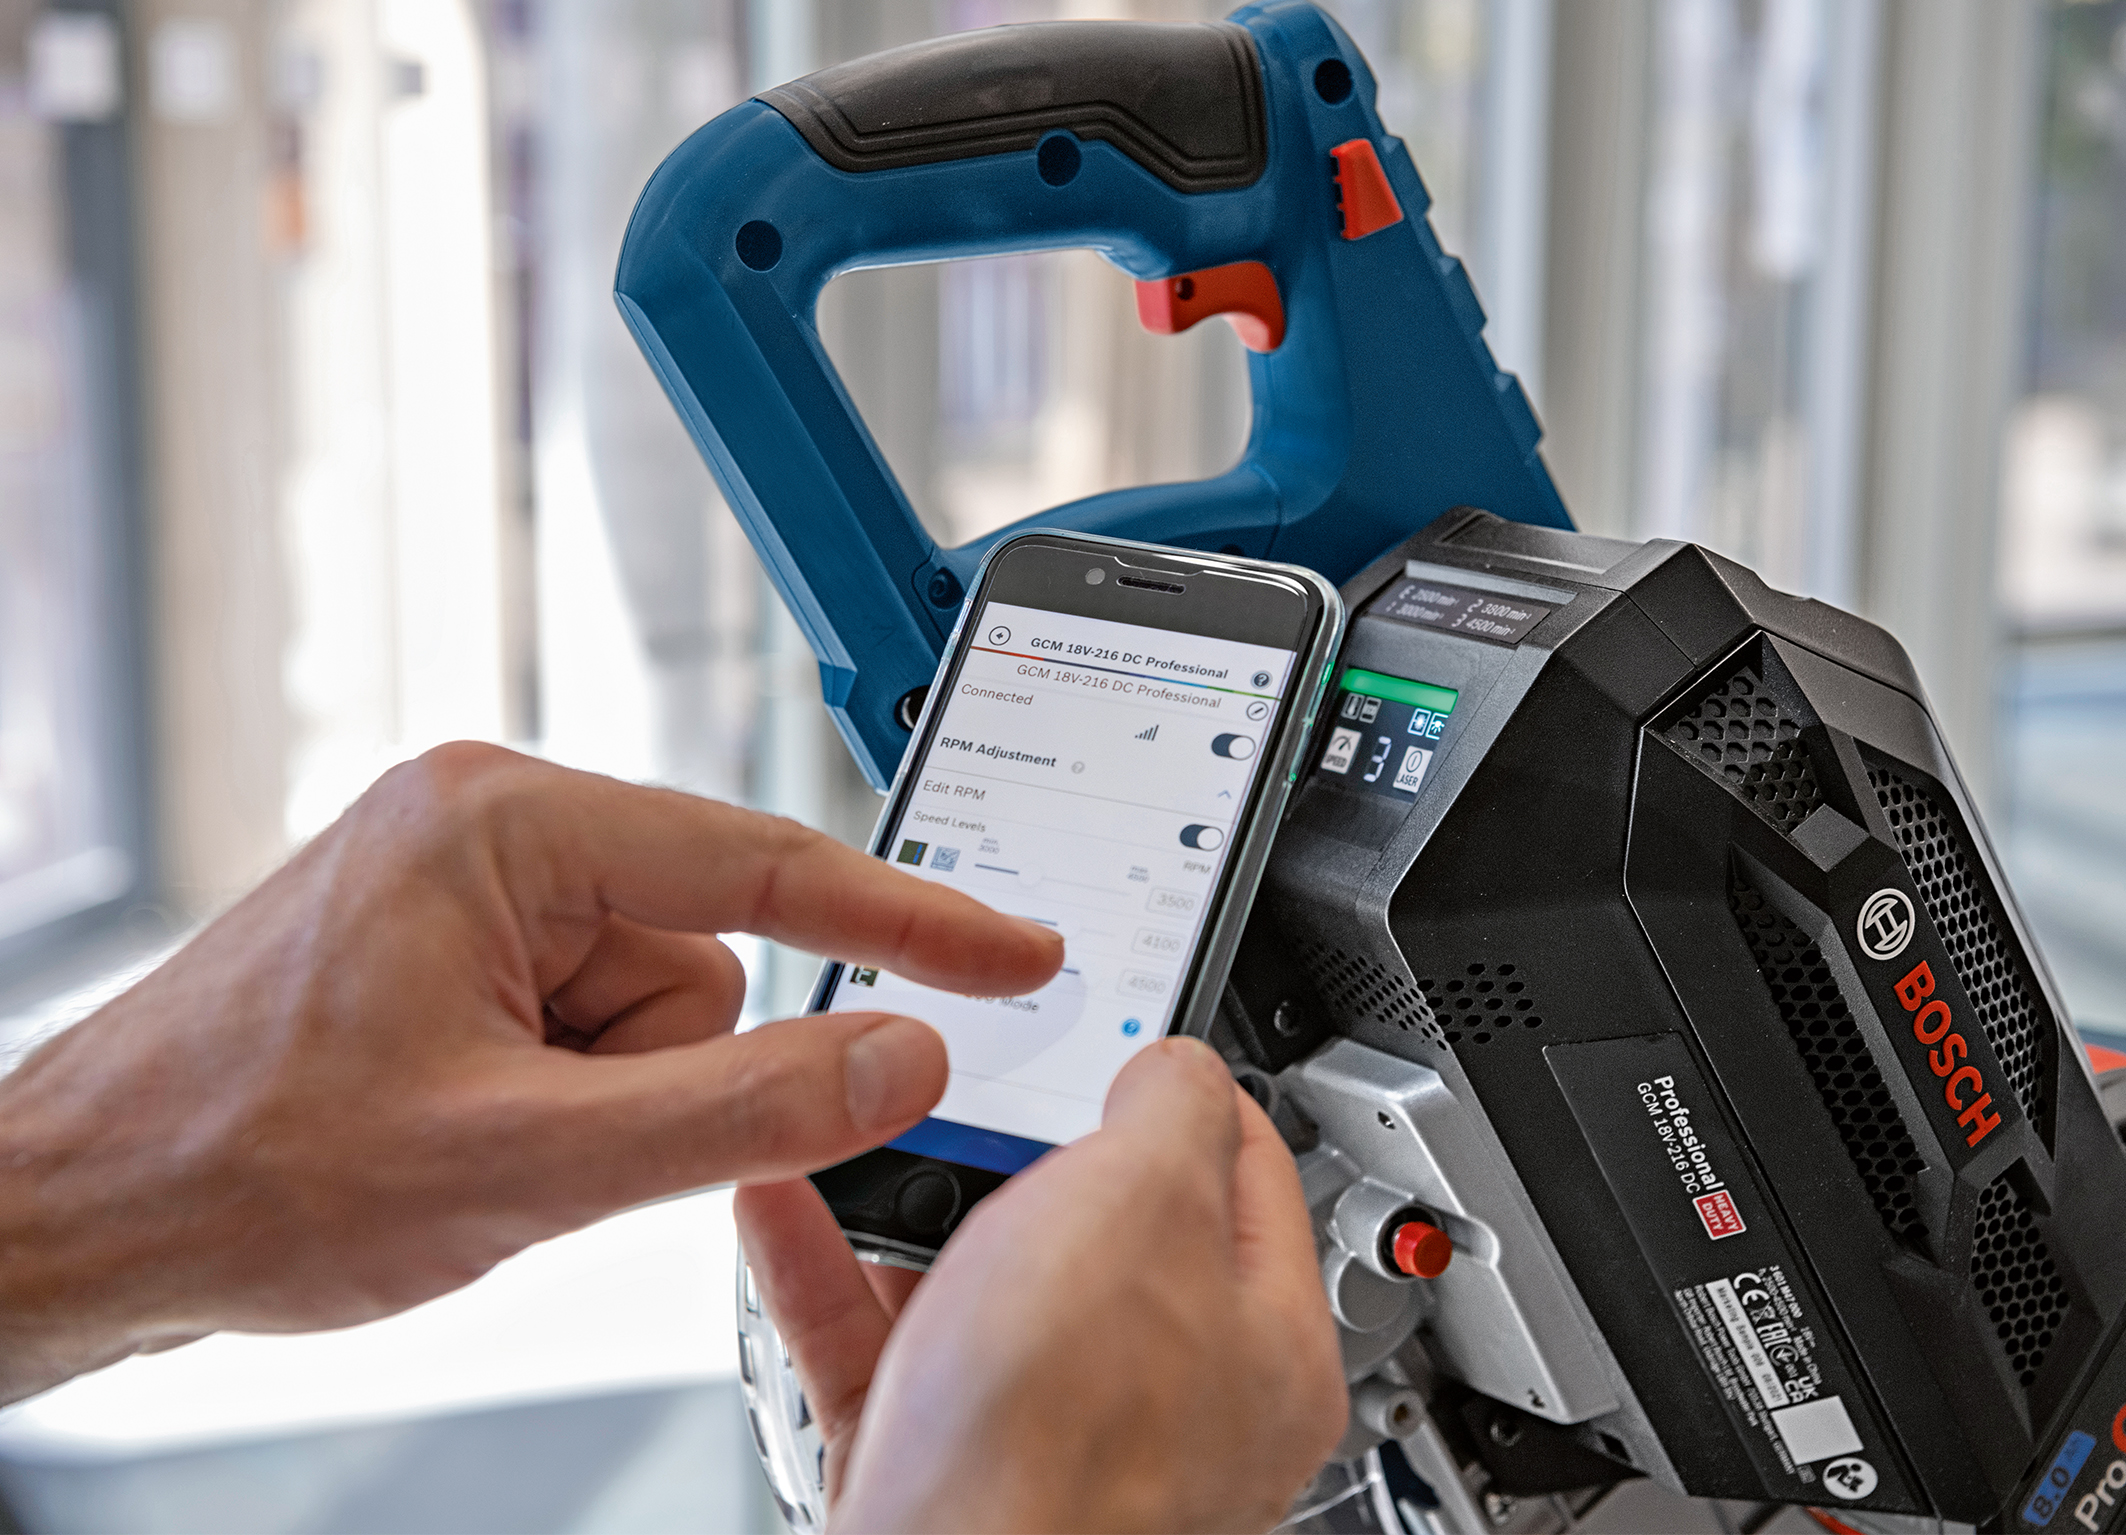 Increased comfort thanks to user interface and app: Biturbo miter saw from Bosch for professionals